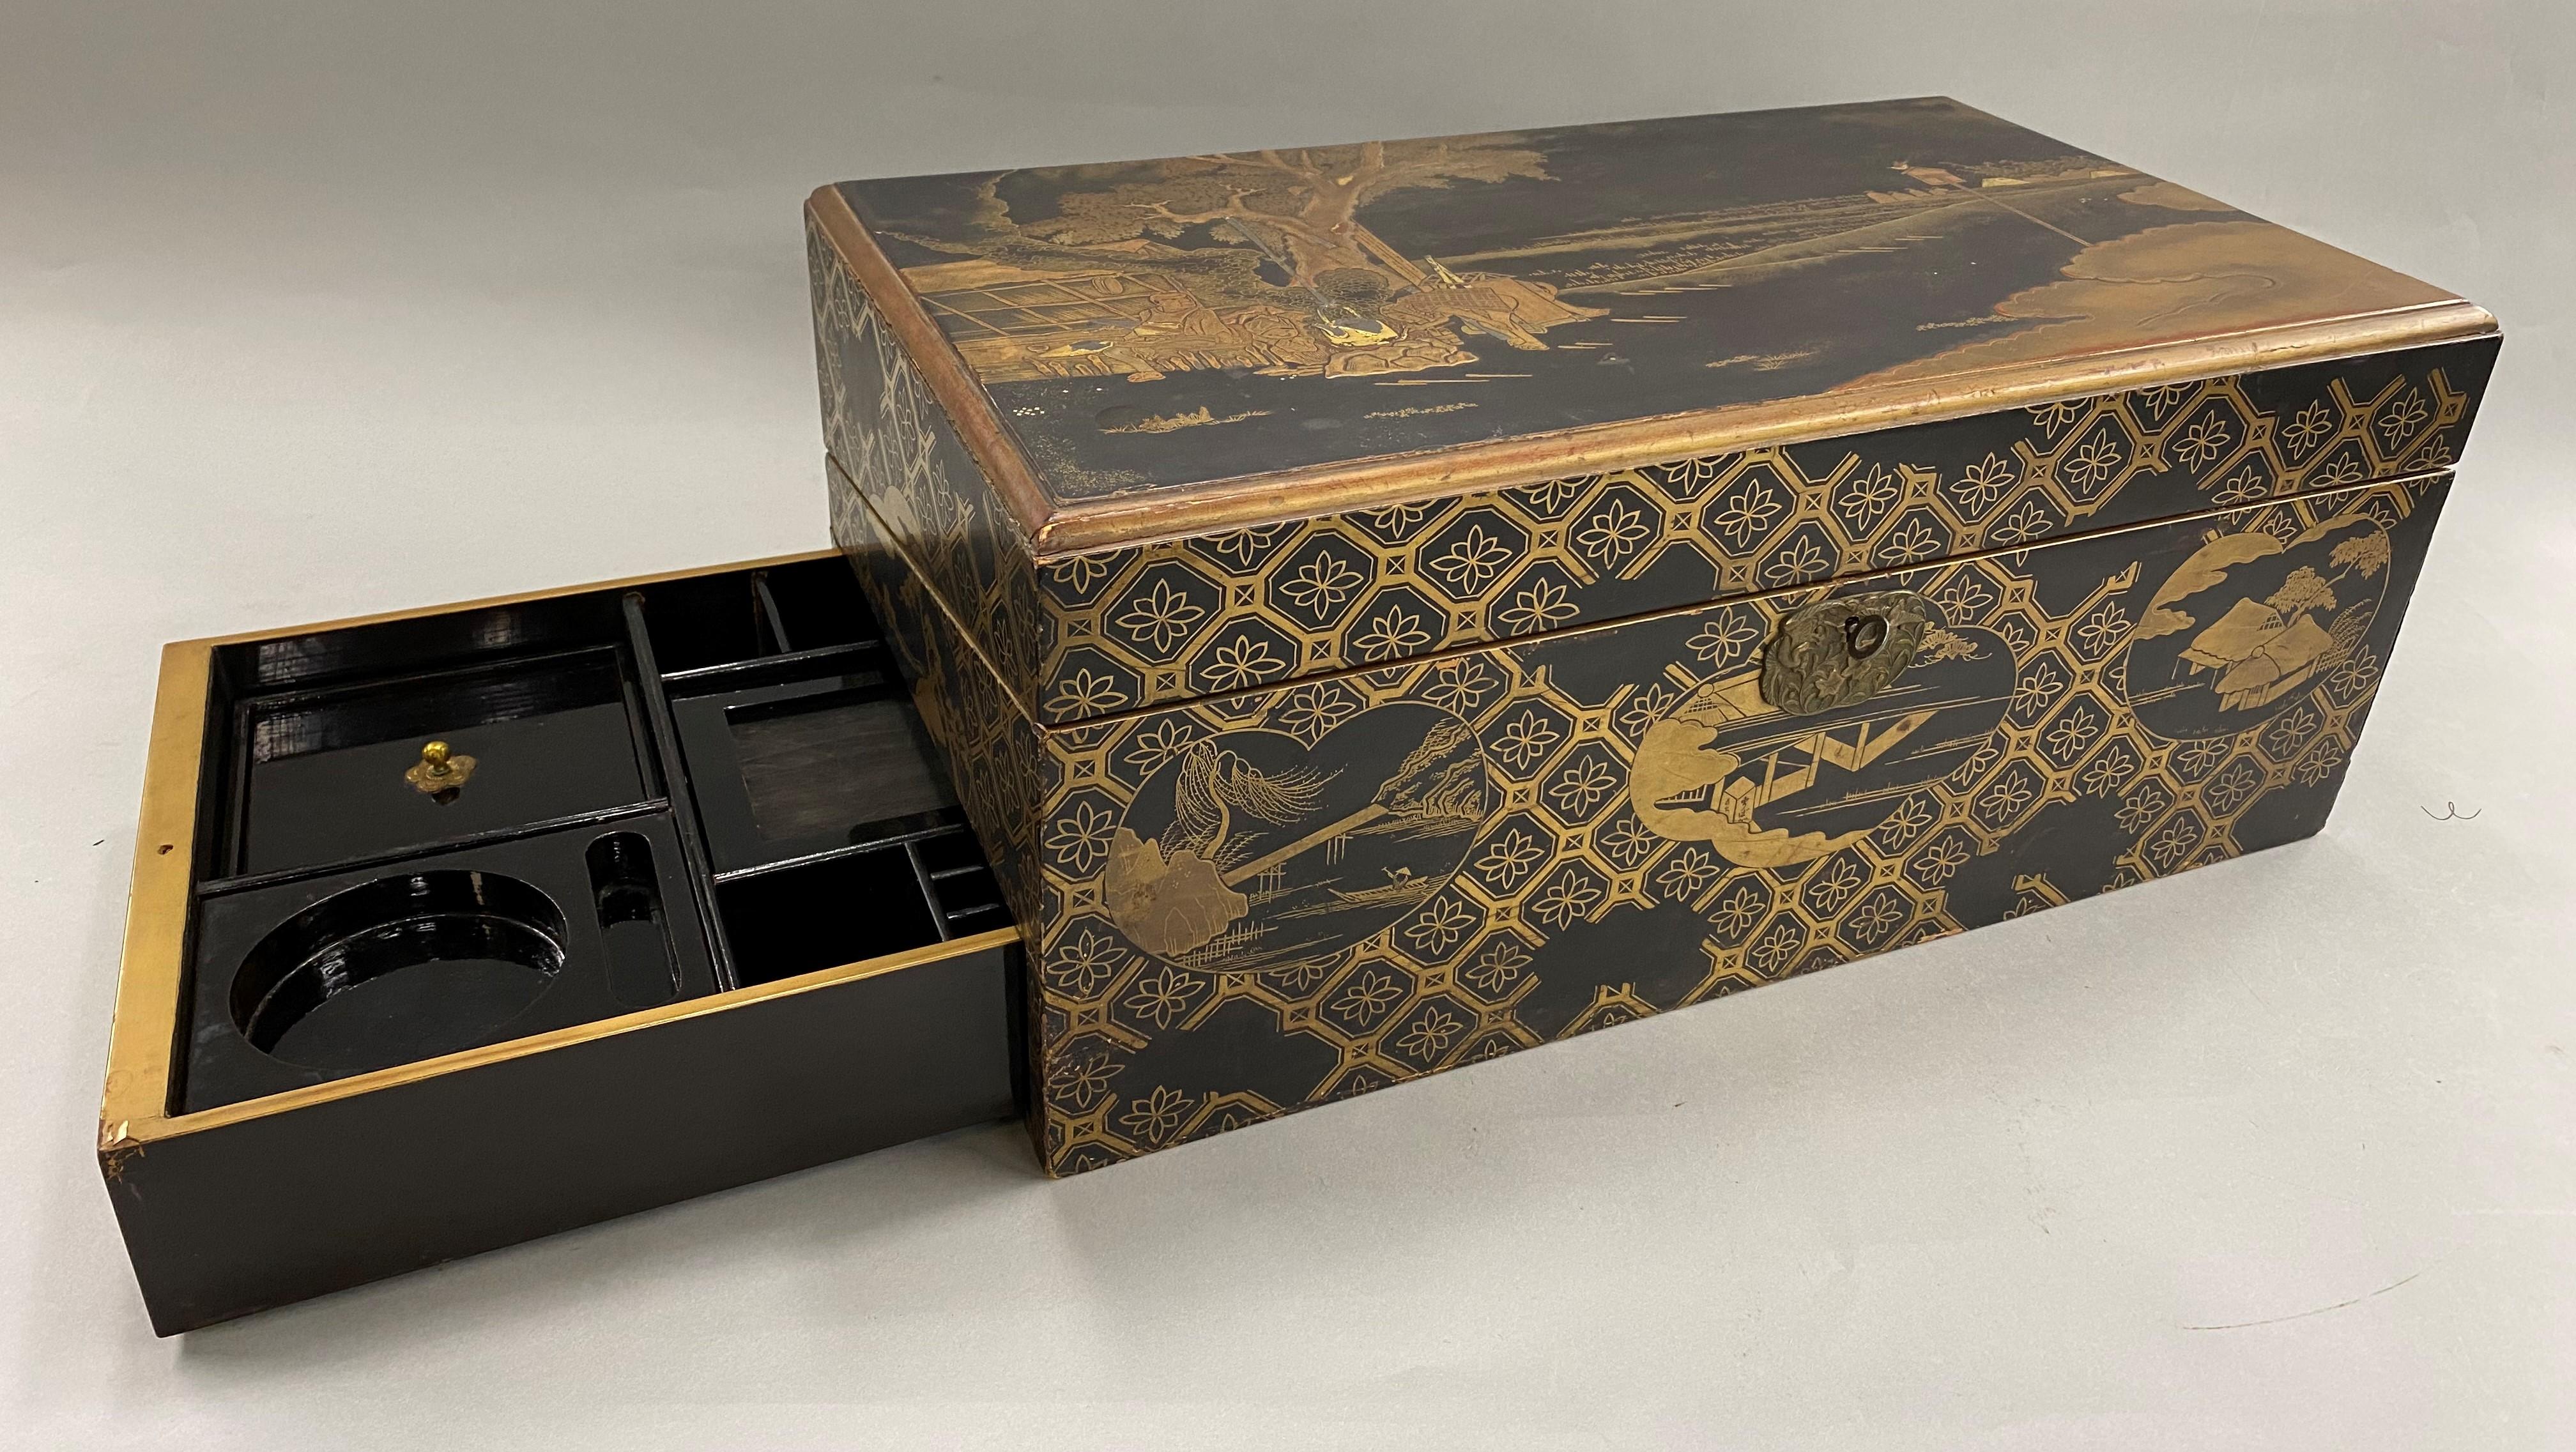 An excellent quality Japanese Meiji period carved wooden writing box or lap desk with compartmentalized interior. With gilt landscape decoration of village scenes accented with geometric patterns around the exterior on all sides, opening to reveal a